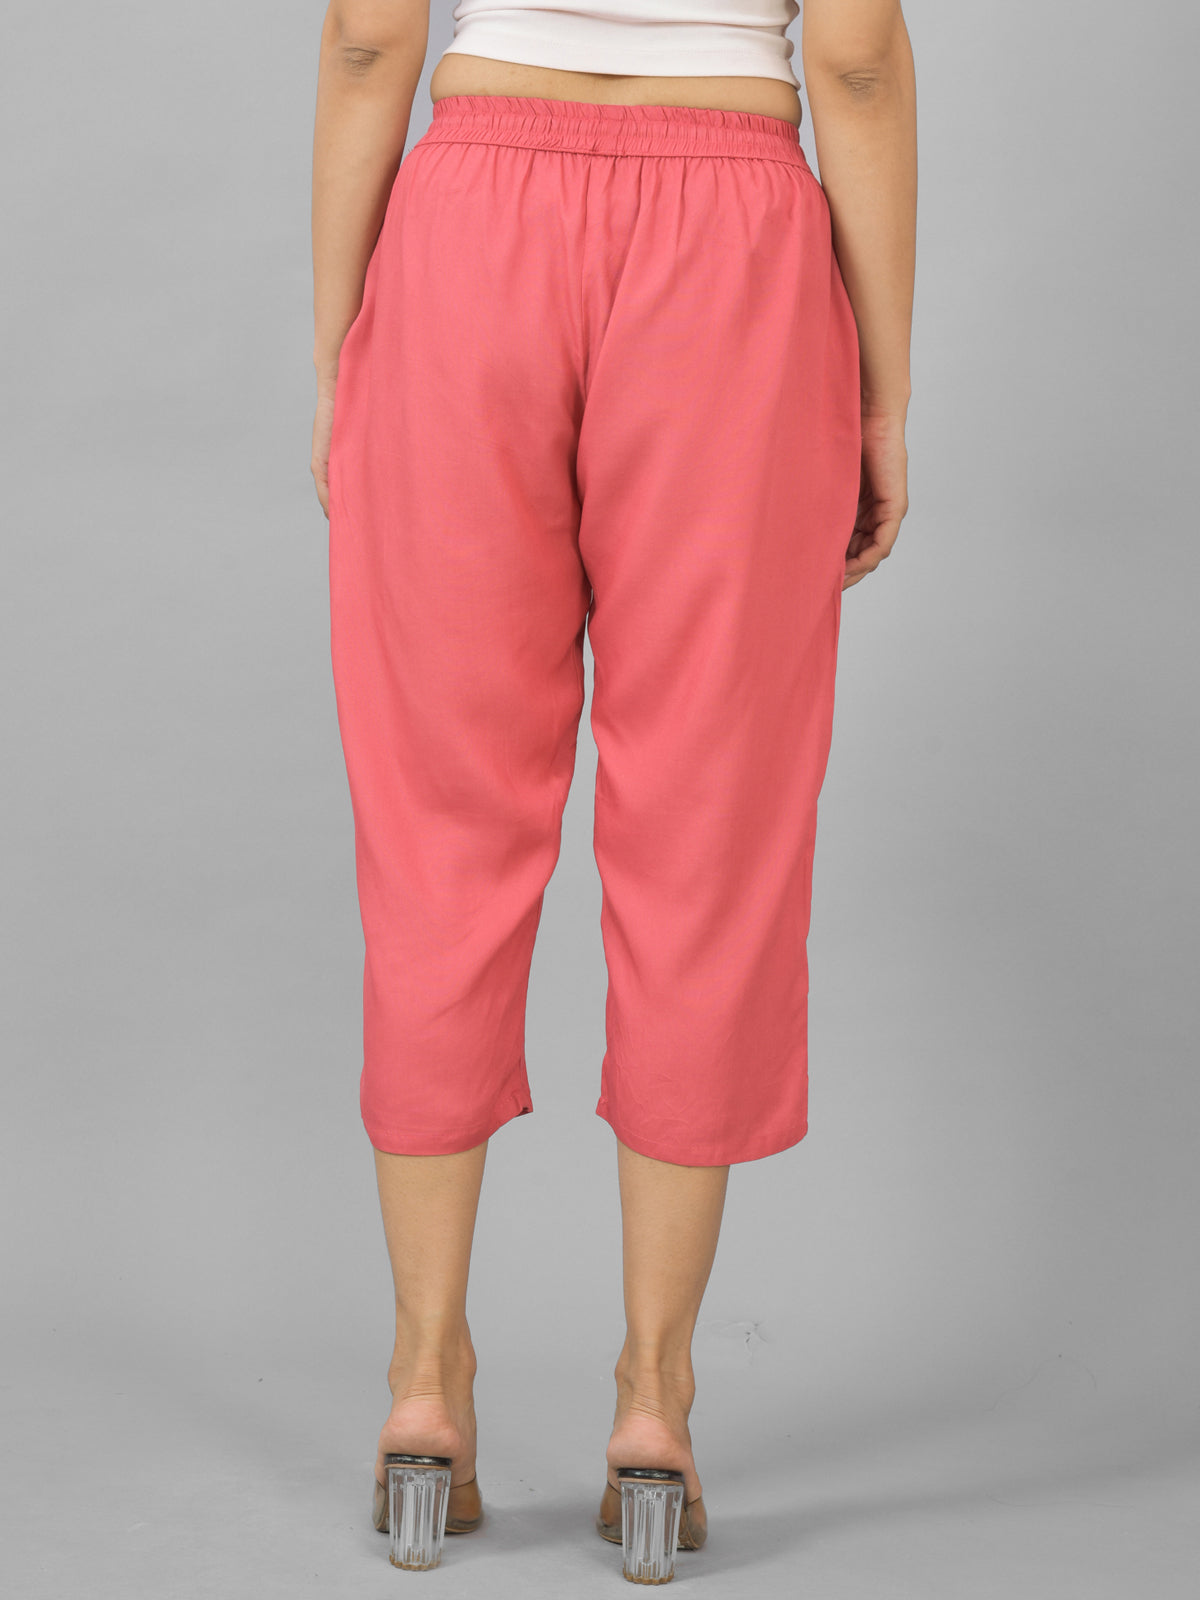 Pack Of 2 Womens Black And Mauve Pink Calf Length Rayon Culottes Trouser Combo